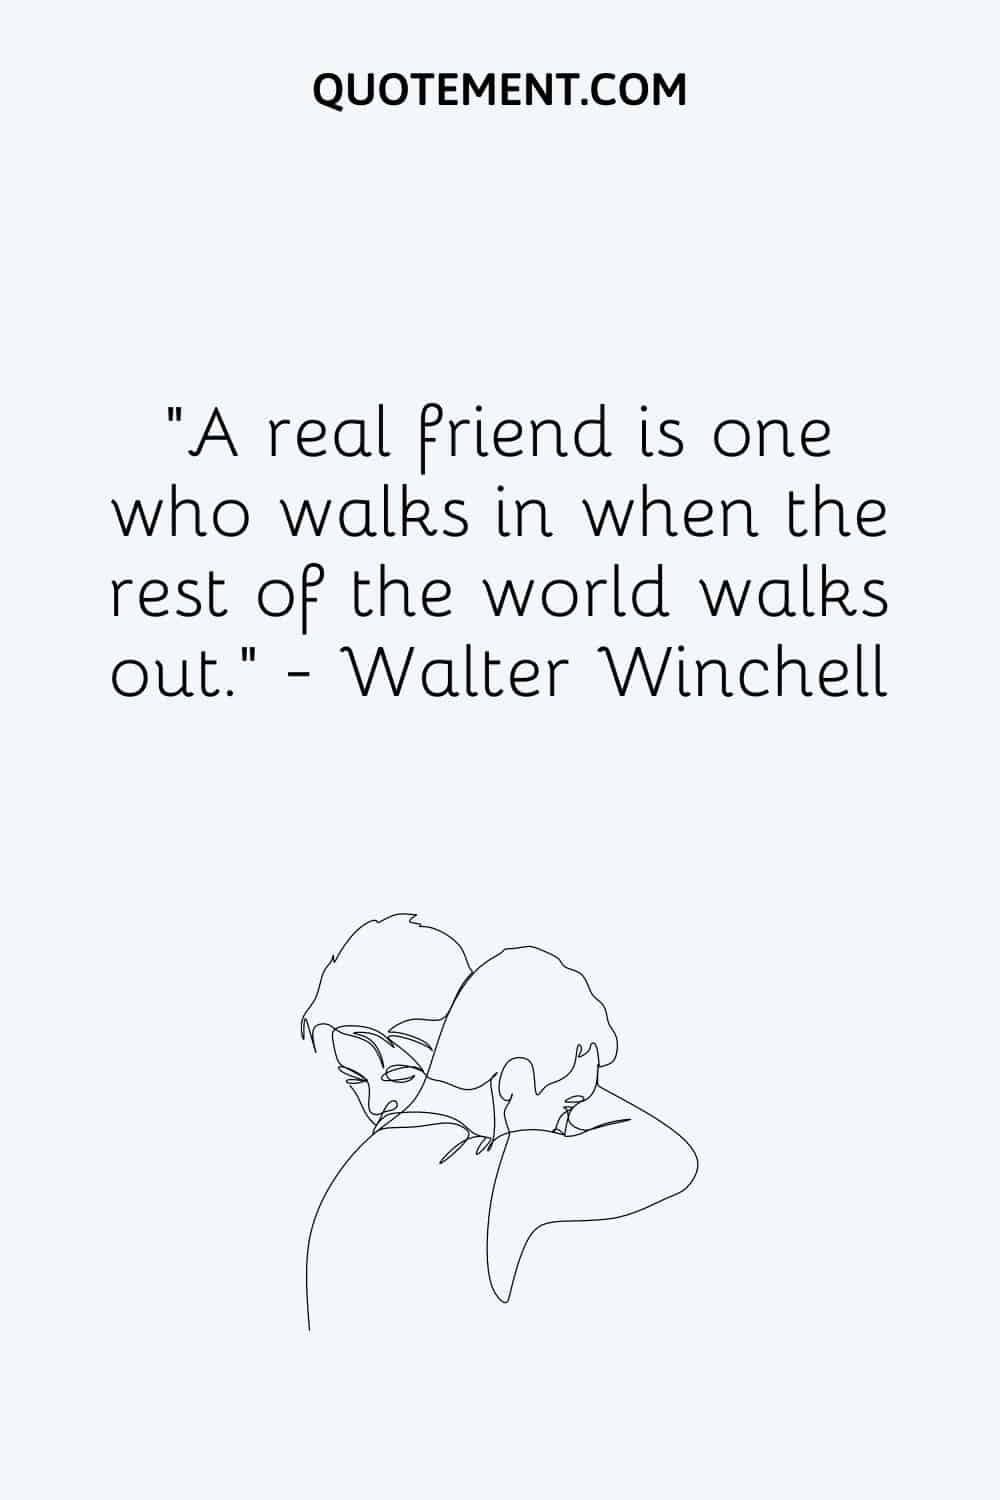 A real friend is one who walks in when the rest of the world walks out